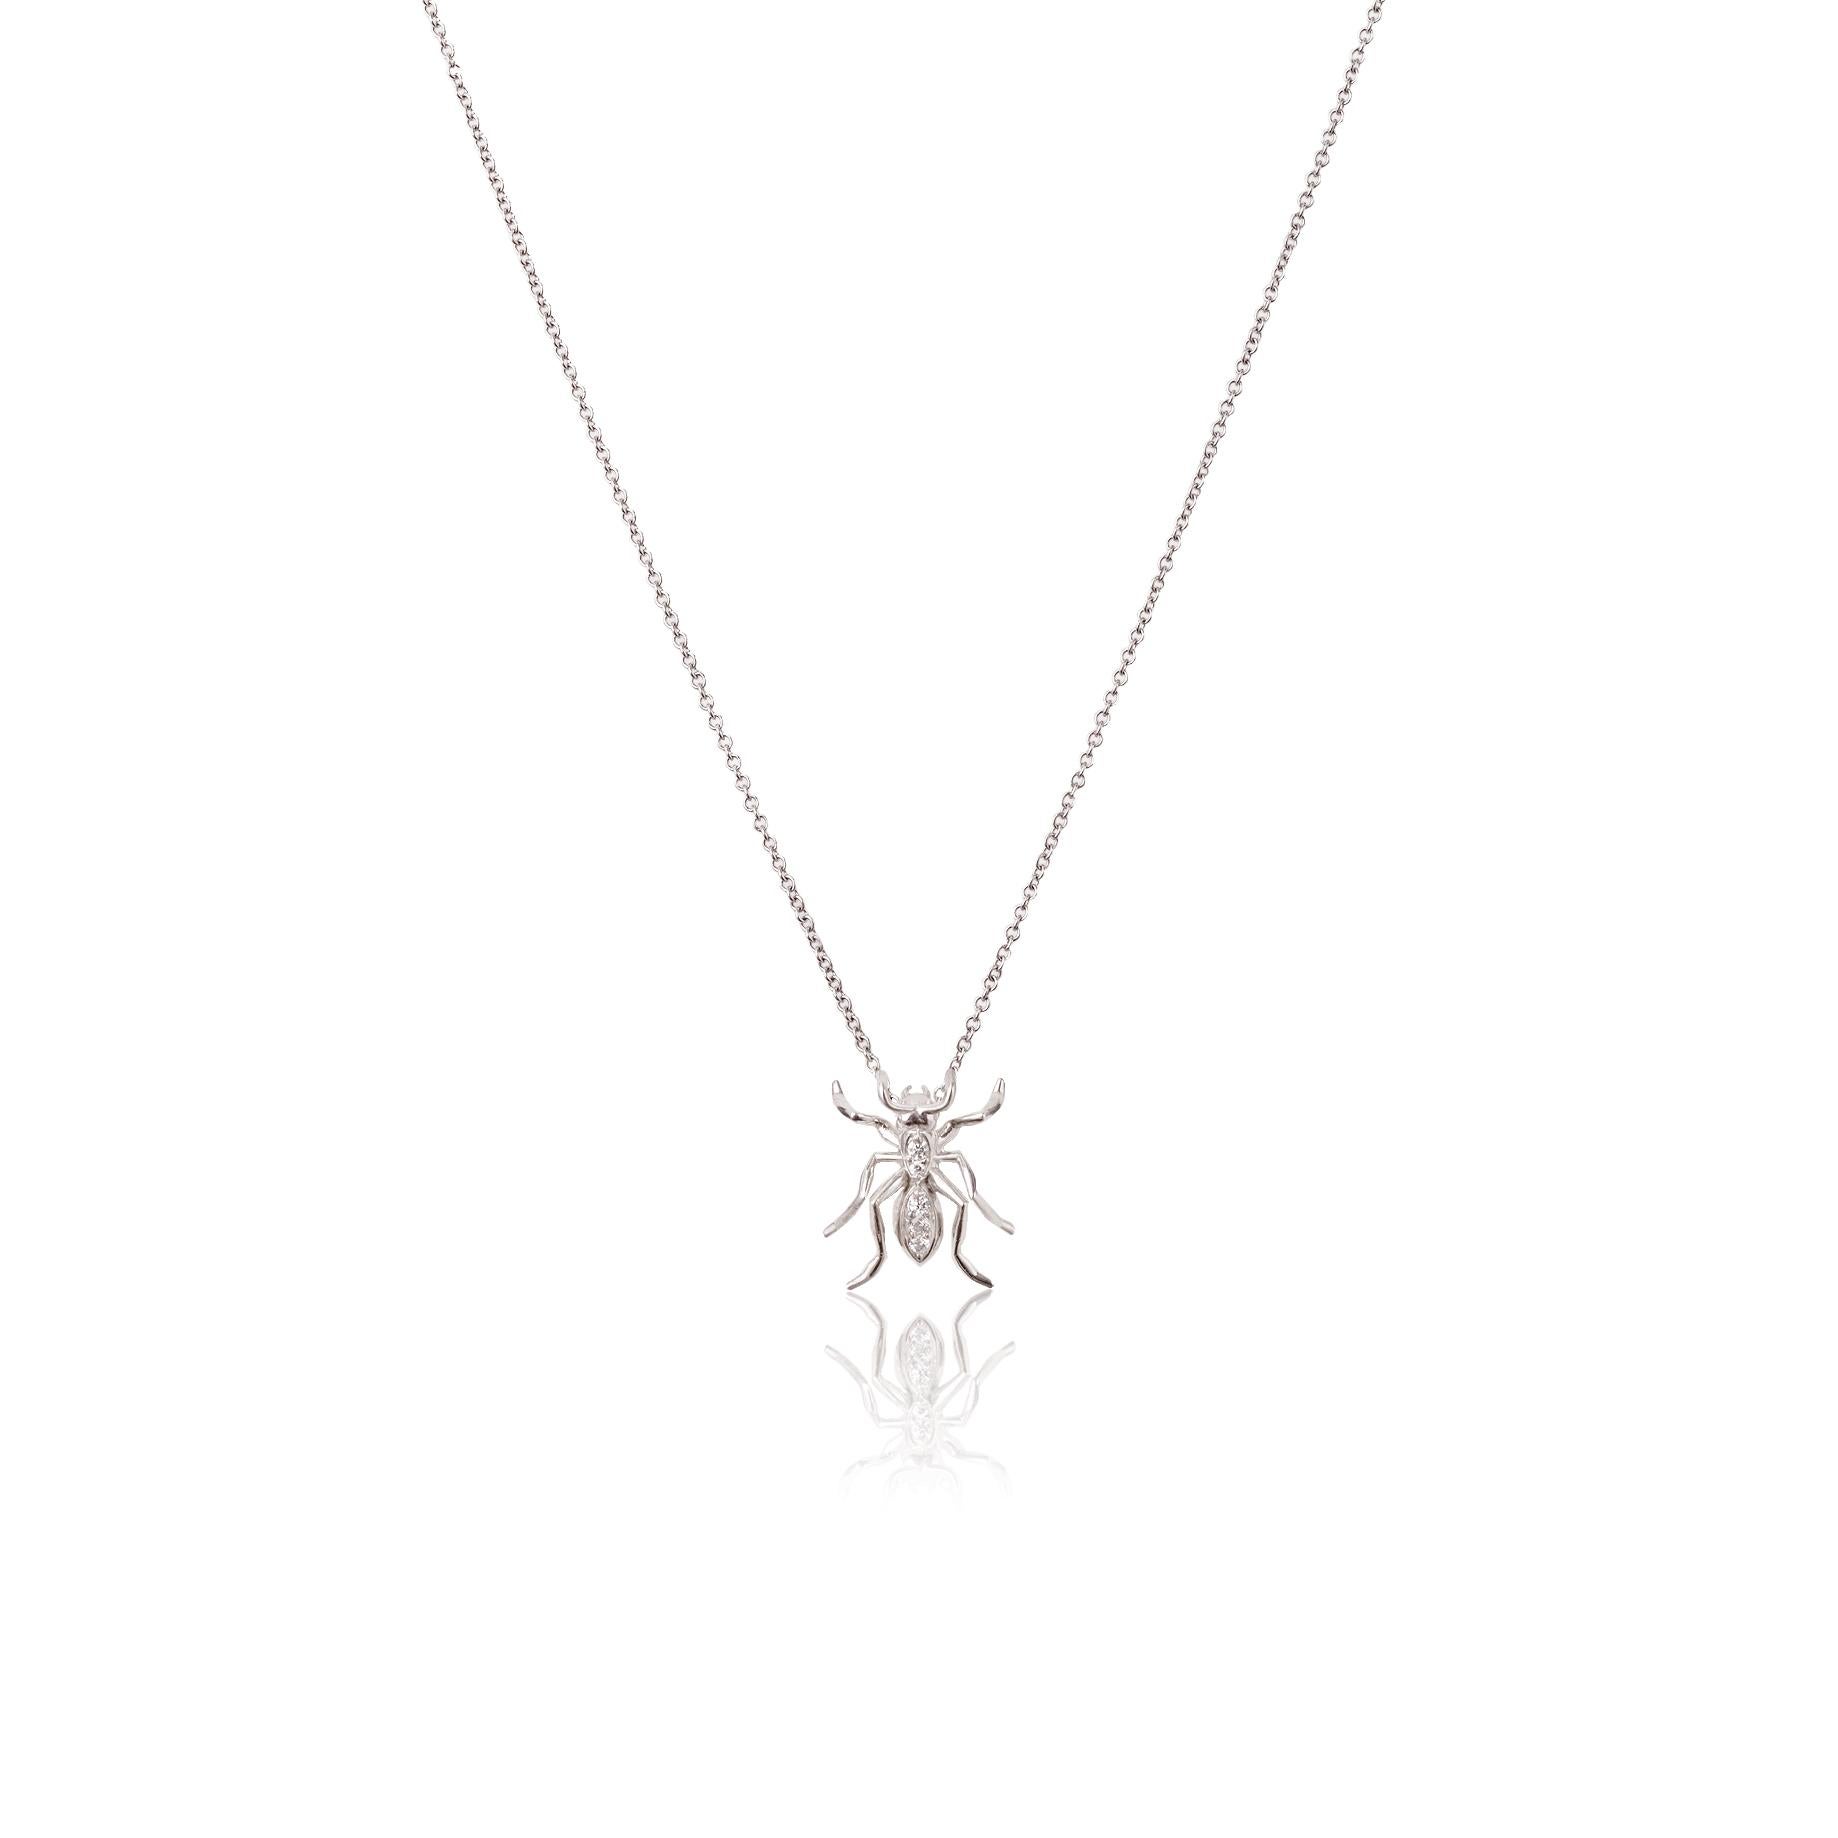 The AT401PD WG pendant is a beautifully crafted piece of jewelry that is both unique and meaningful. Its design is inspired by the queen ant, which is known for its leadership role in the ant colony. The pendant is made of 14k white gold and is